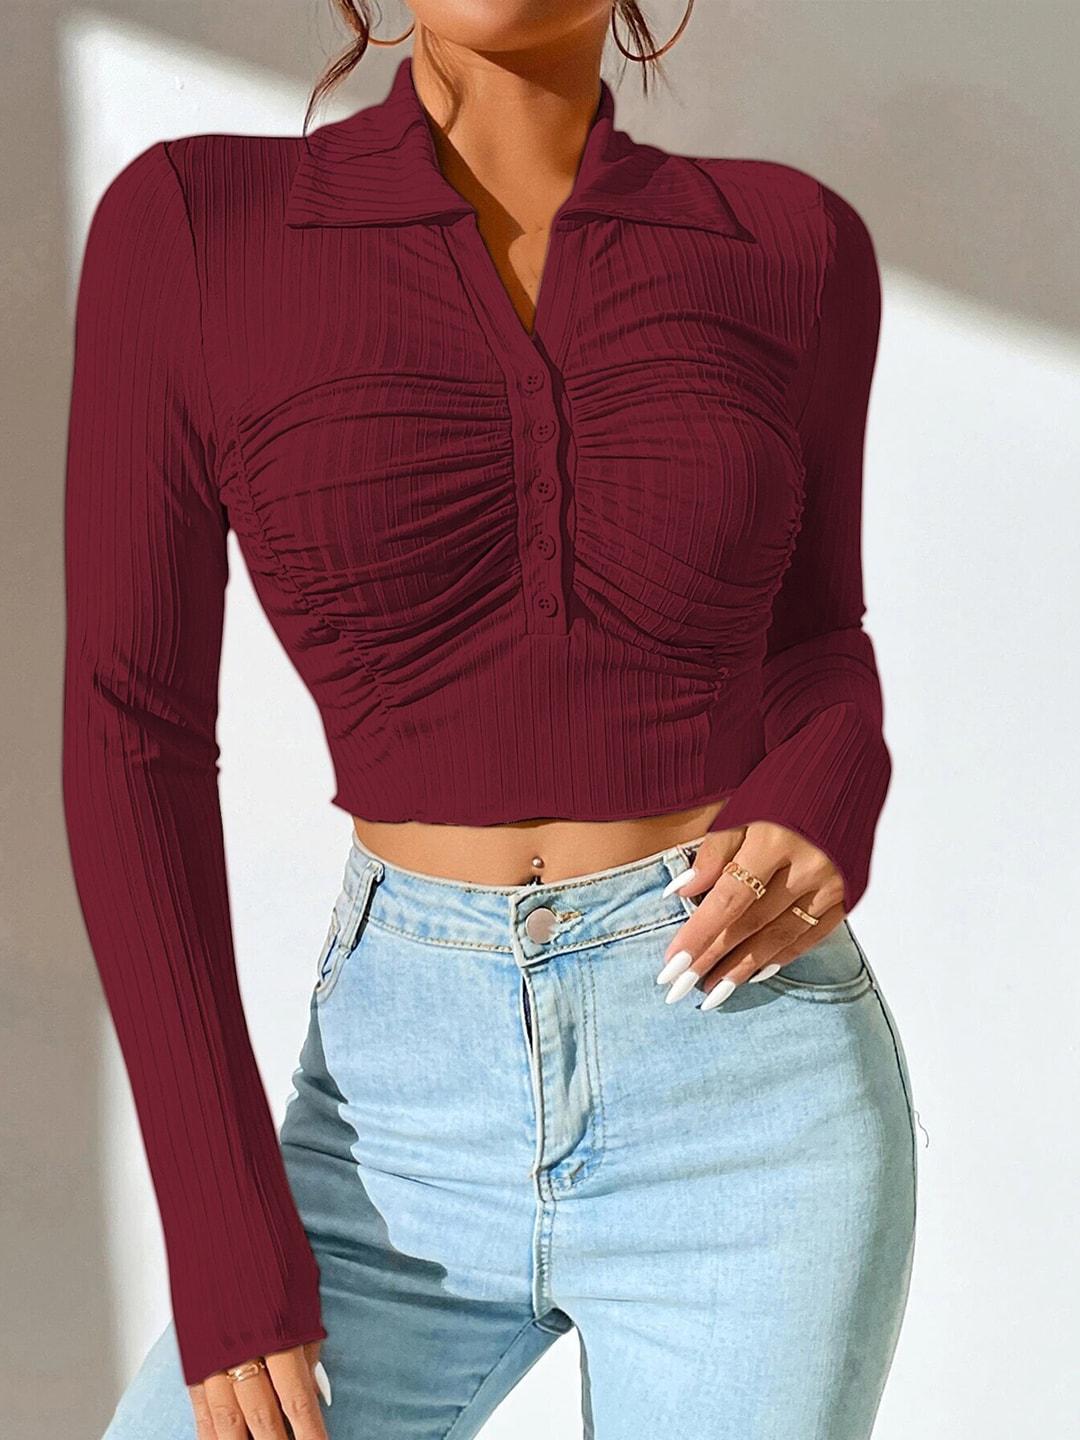 slyck-maroon-striped-shirt-style-crop-top